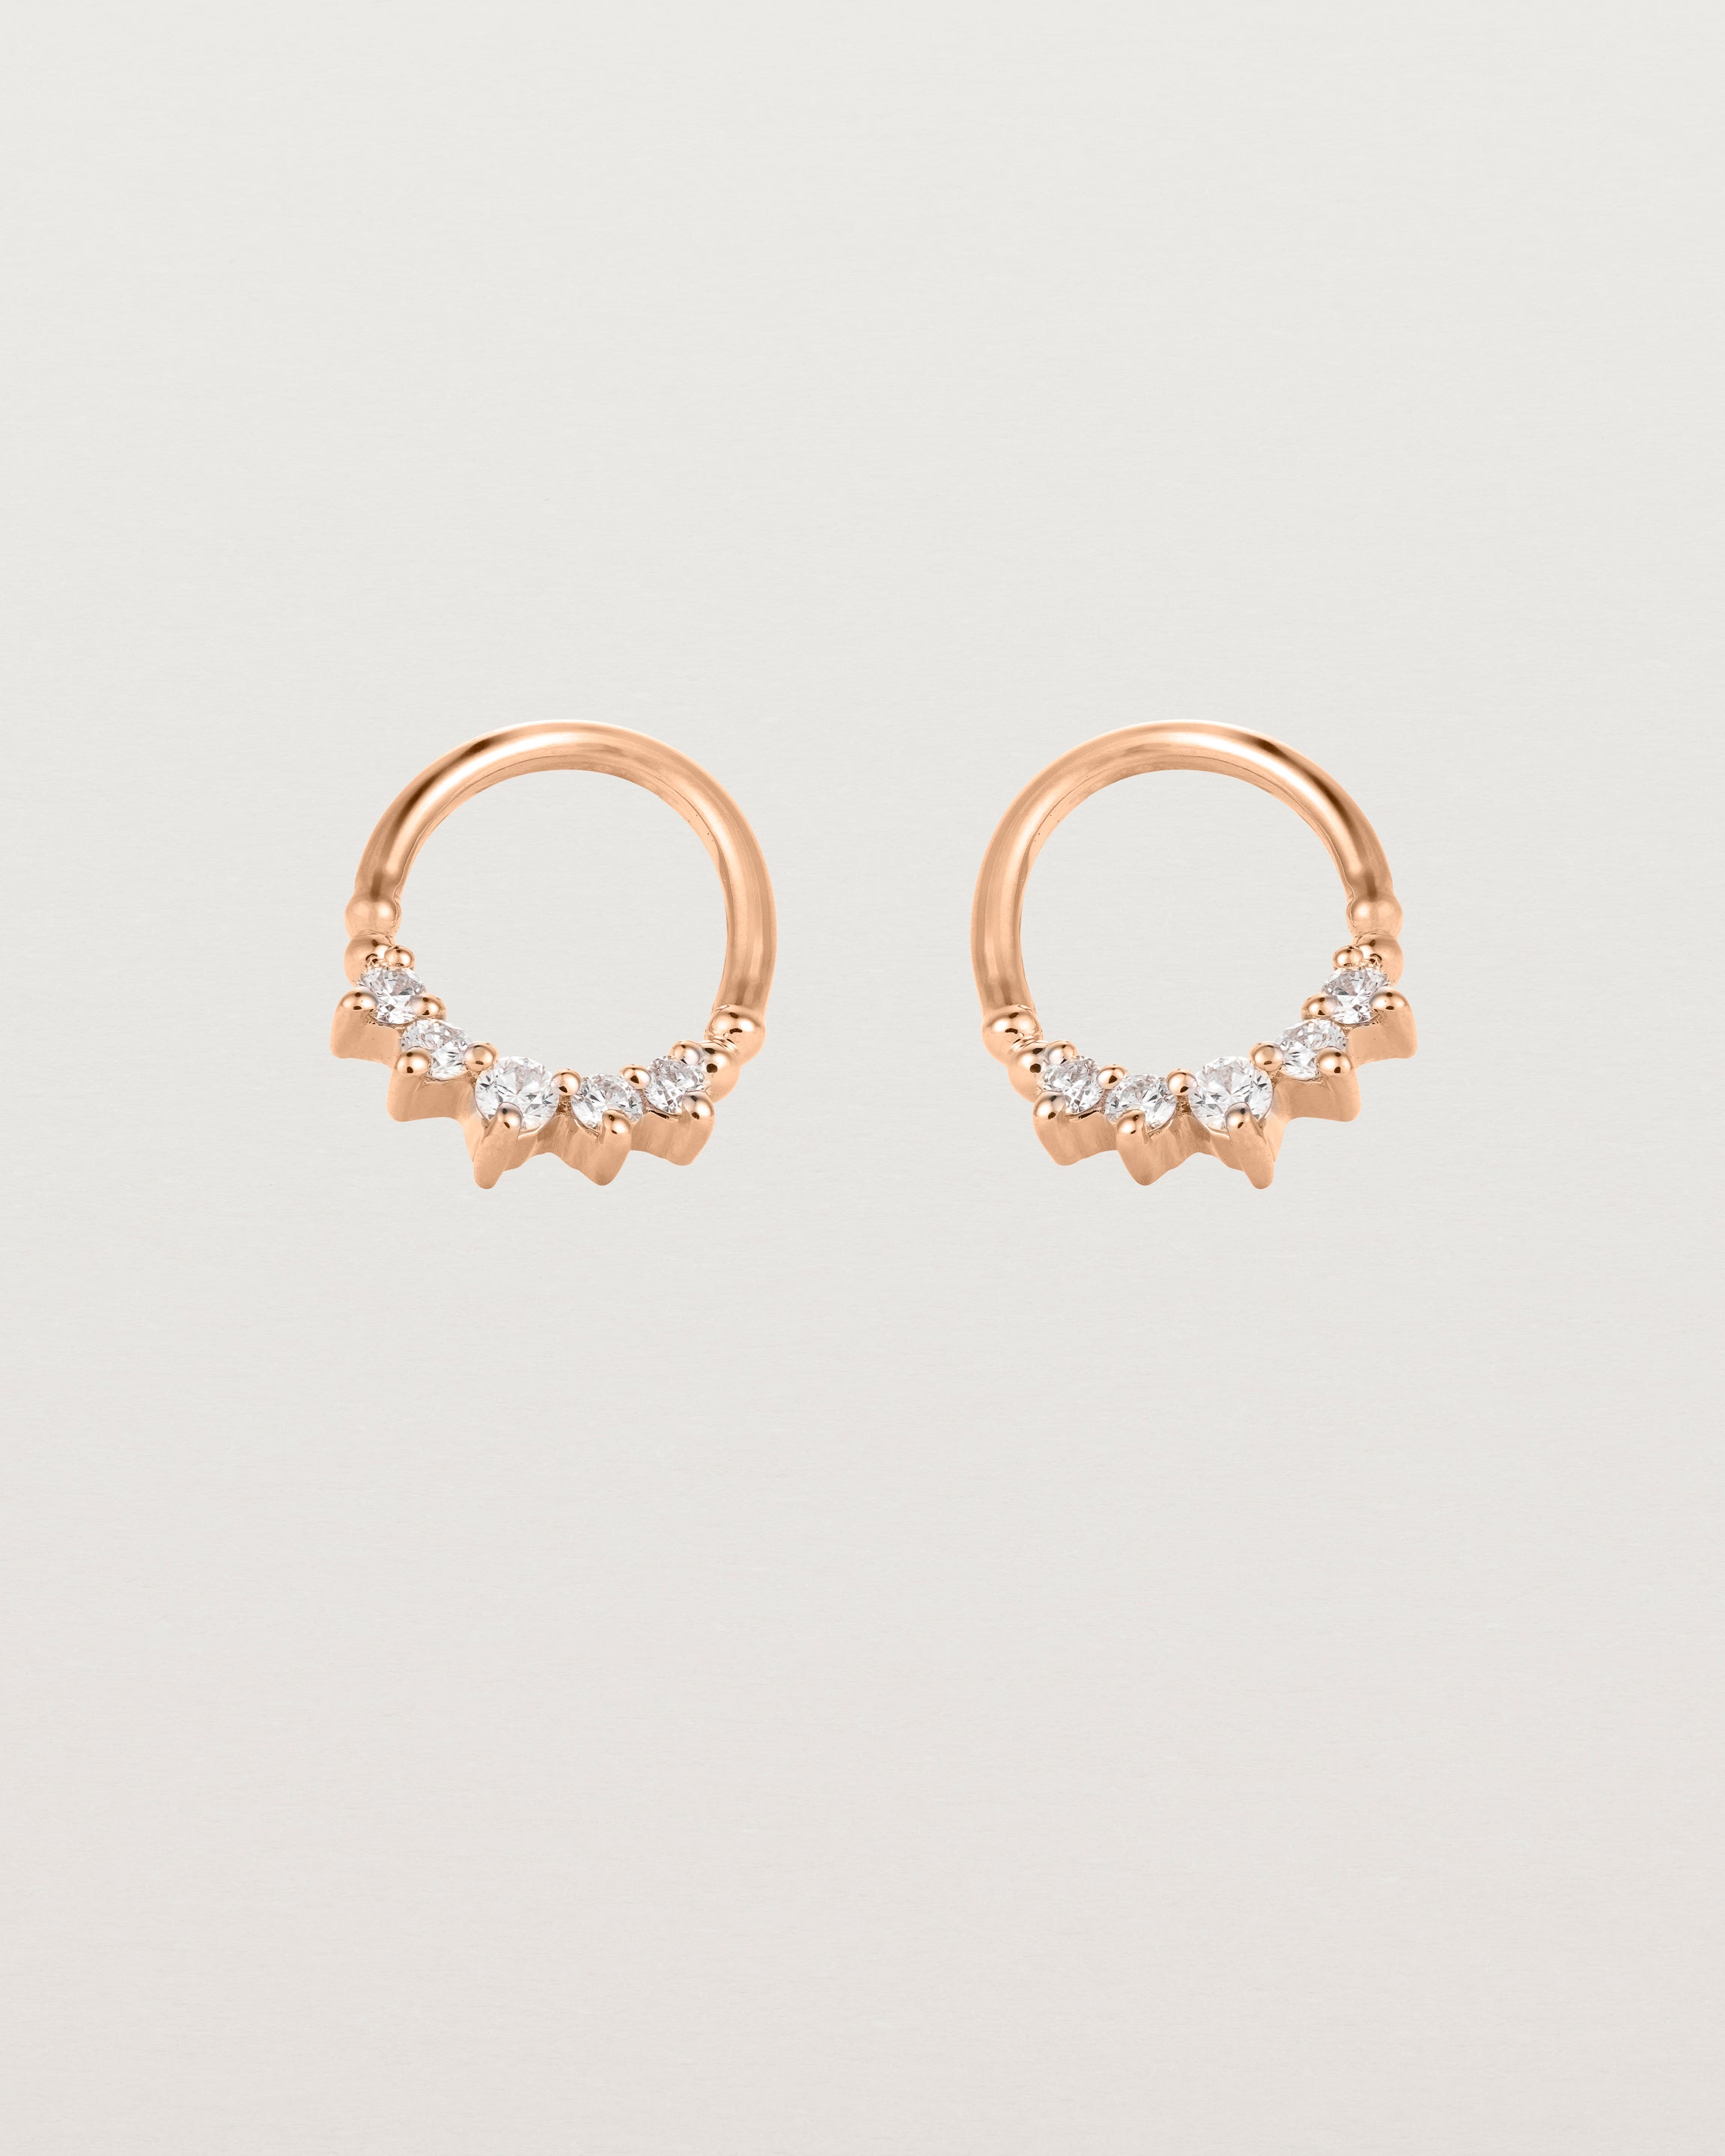 A pair of rose gold oval studs with five white diamonds